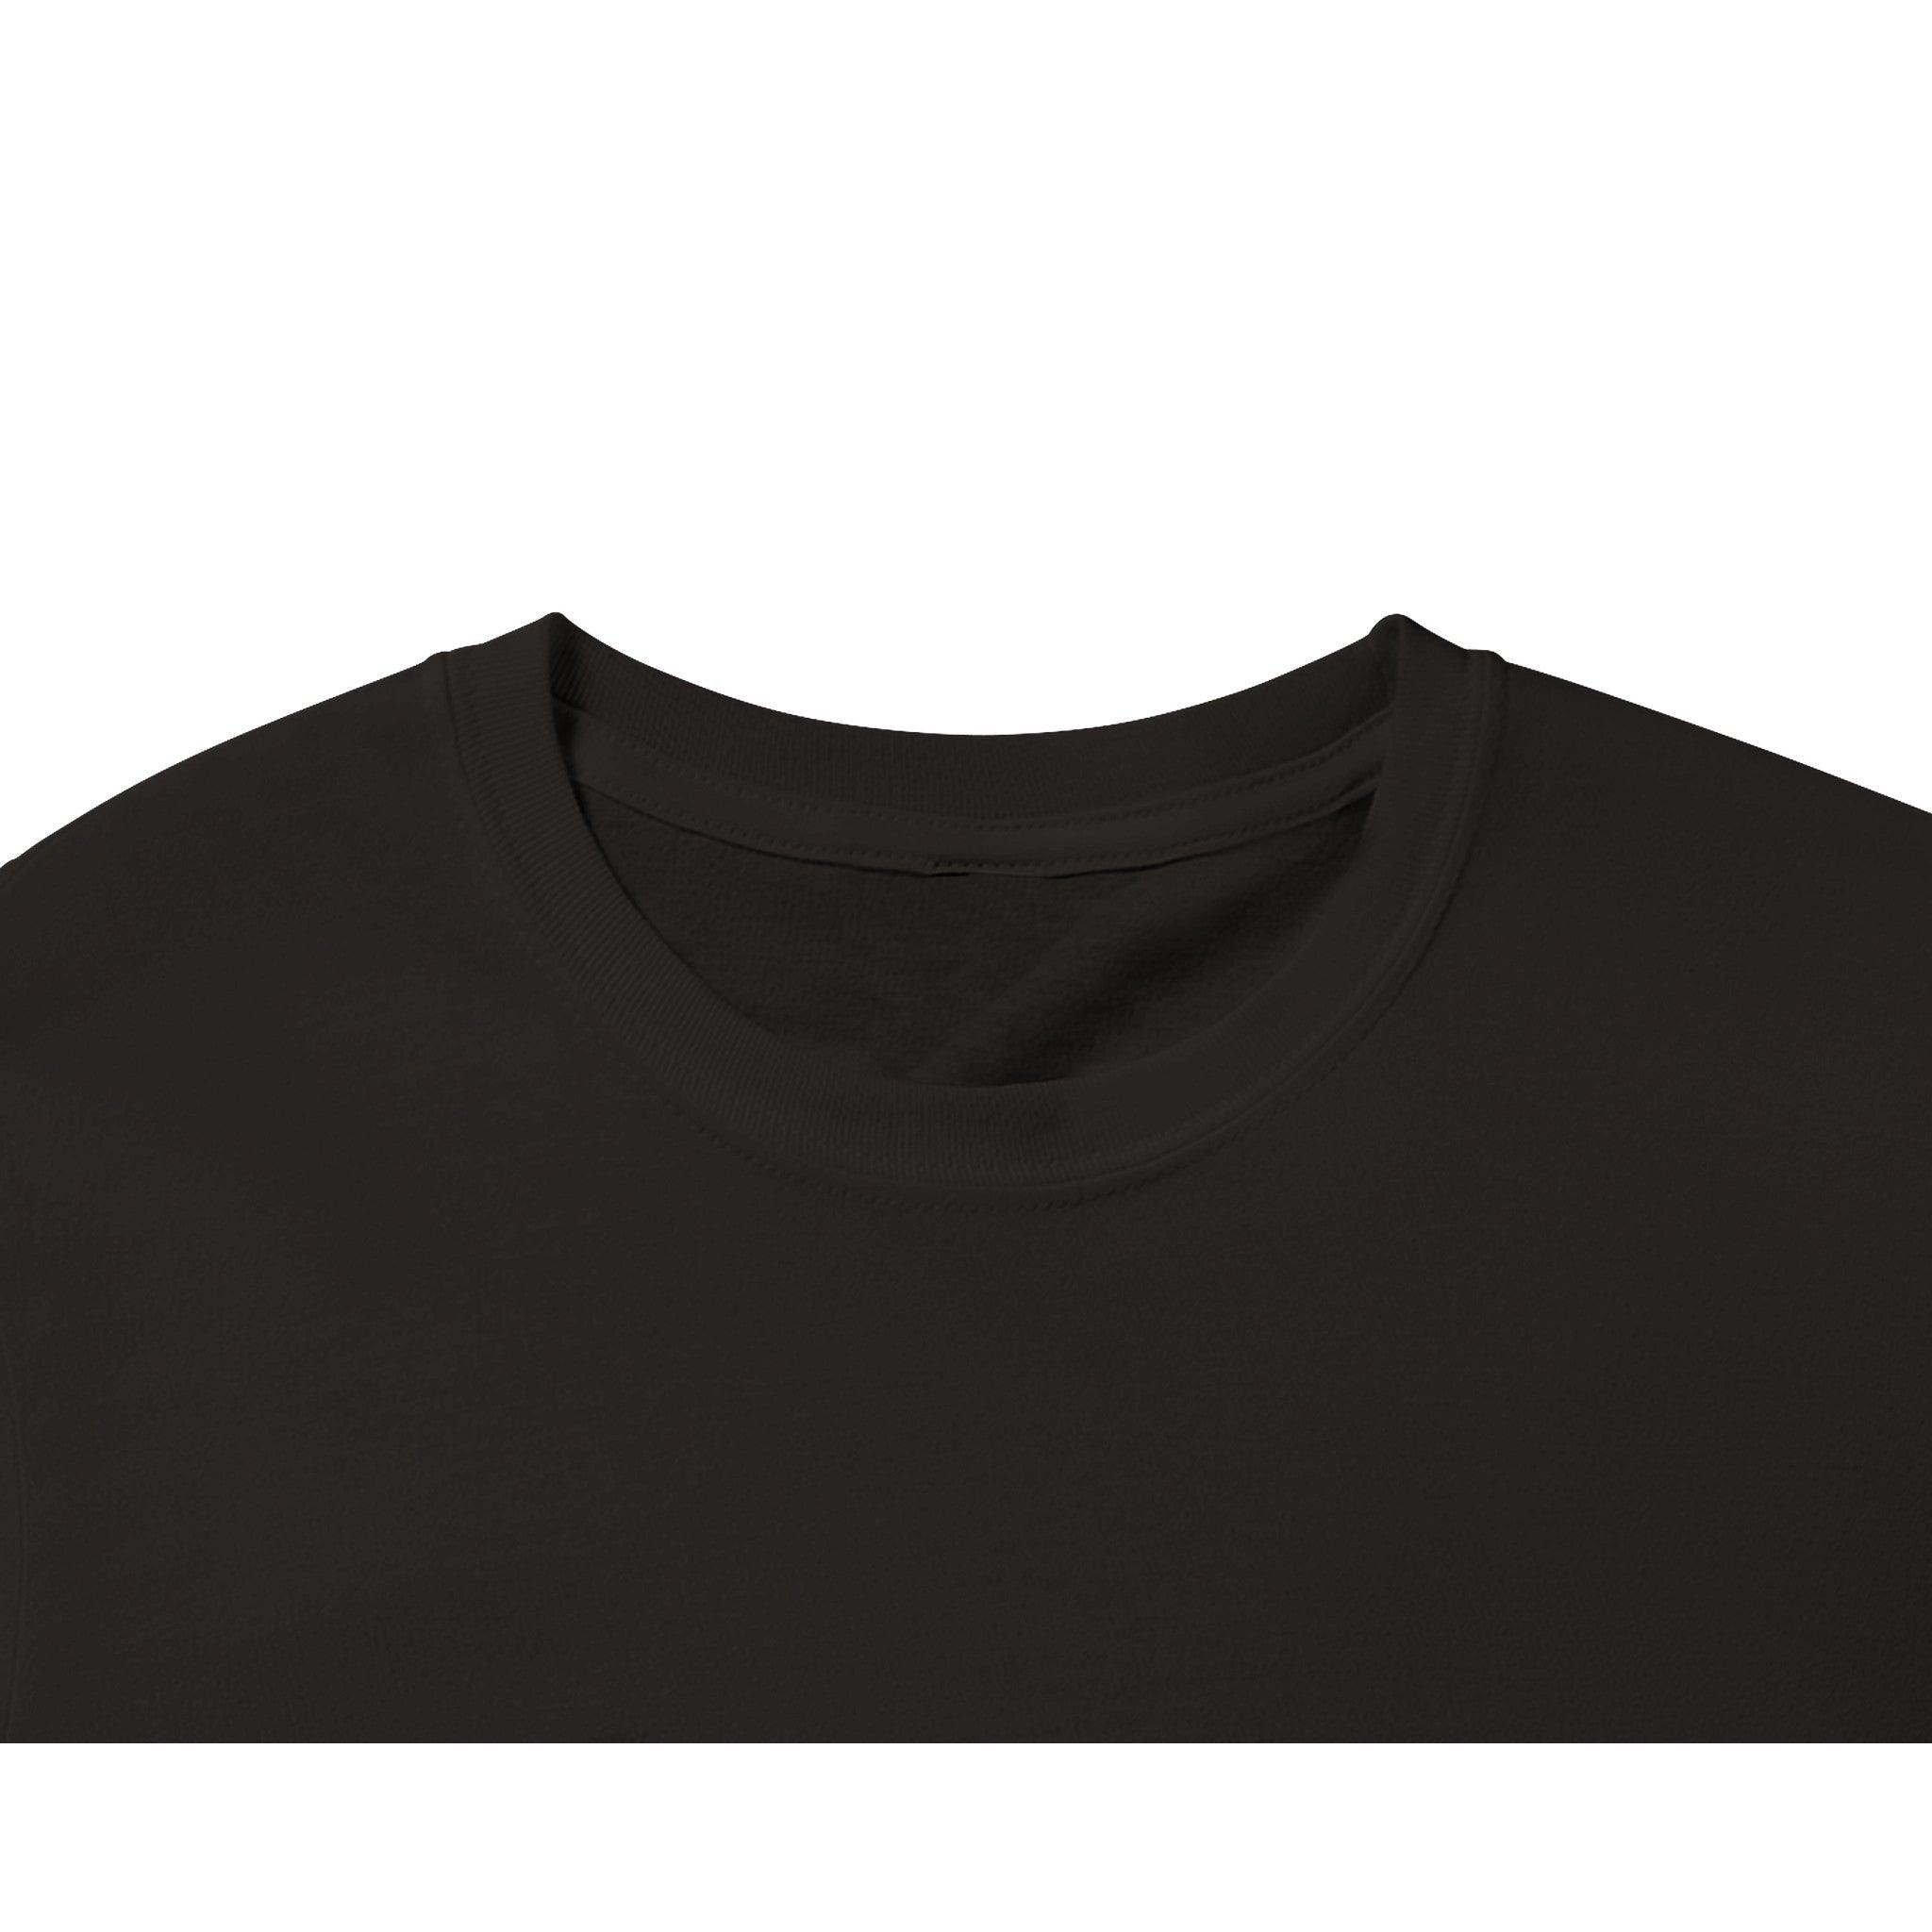 Men's Fitted T-Shirt - Next Level 3600